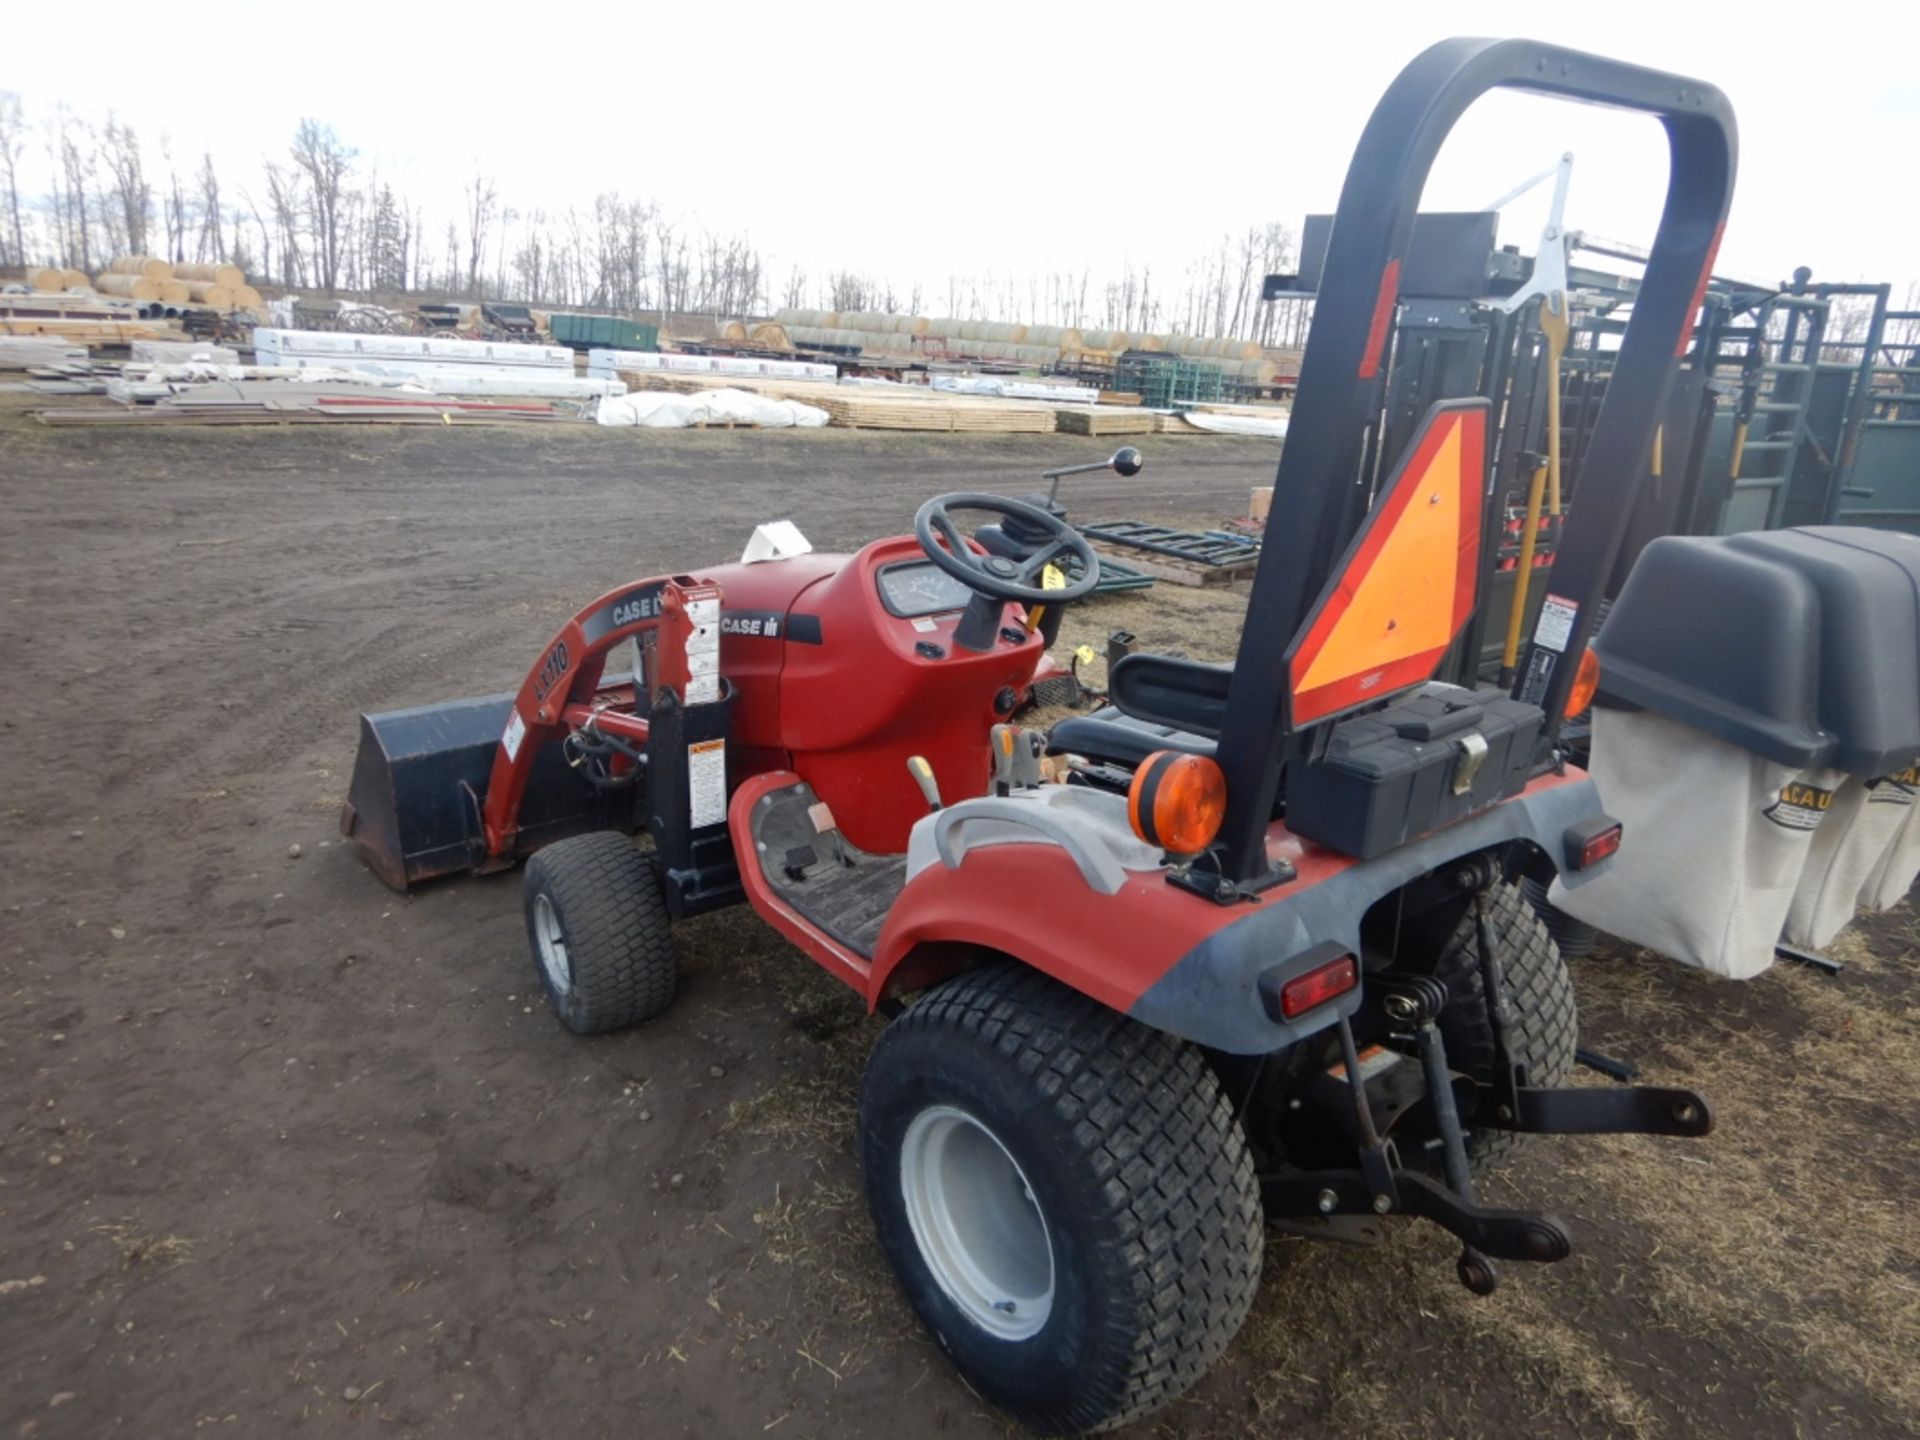 2004 CASE DX24E 4X4 COMPACT TRACTOR W/ CASE LX 110 FRONT END LOADER, 3PT PTO, 60IN BELLY MOWER W/ - Image 2 of 16